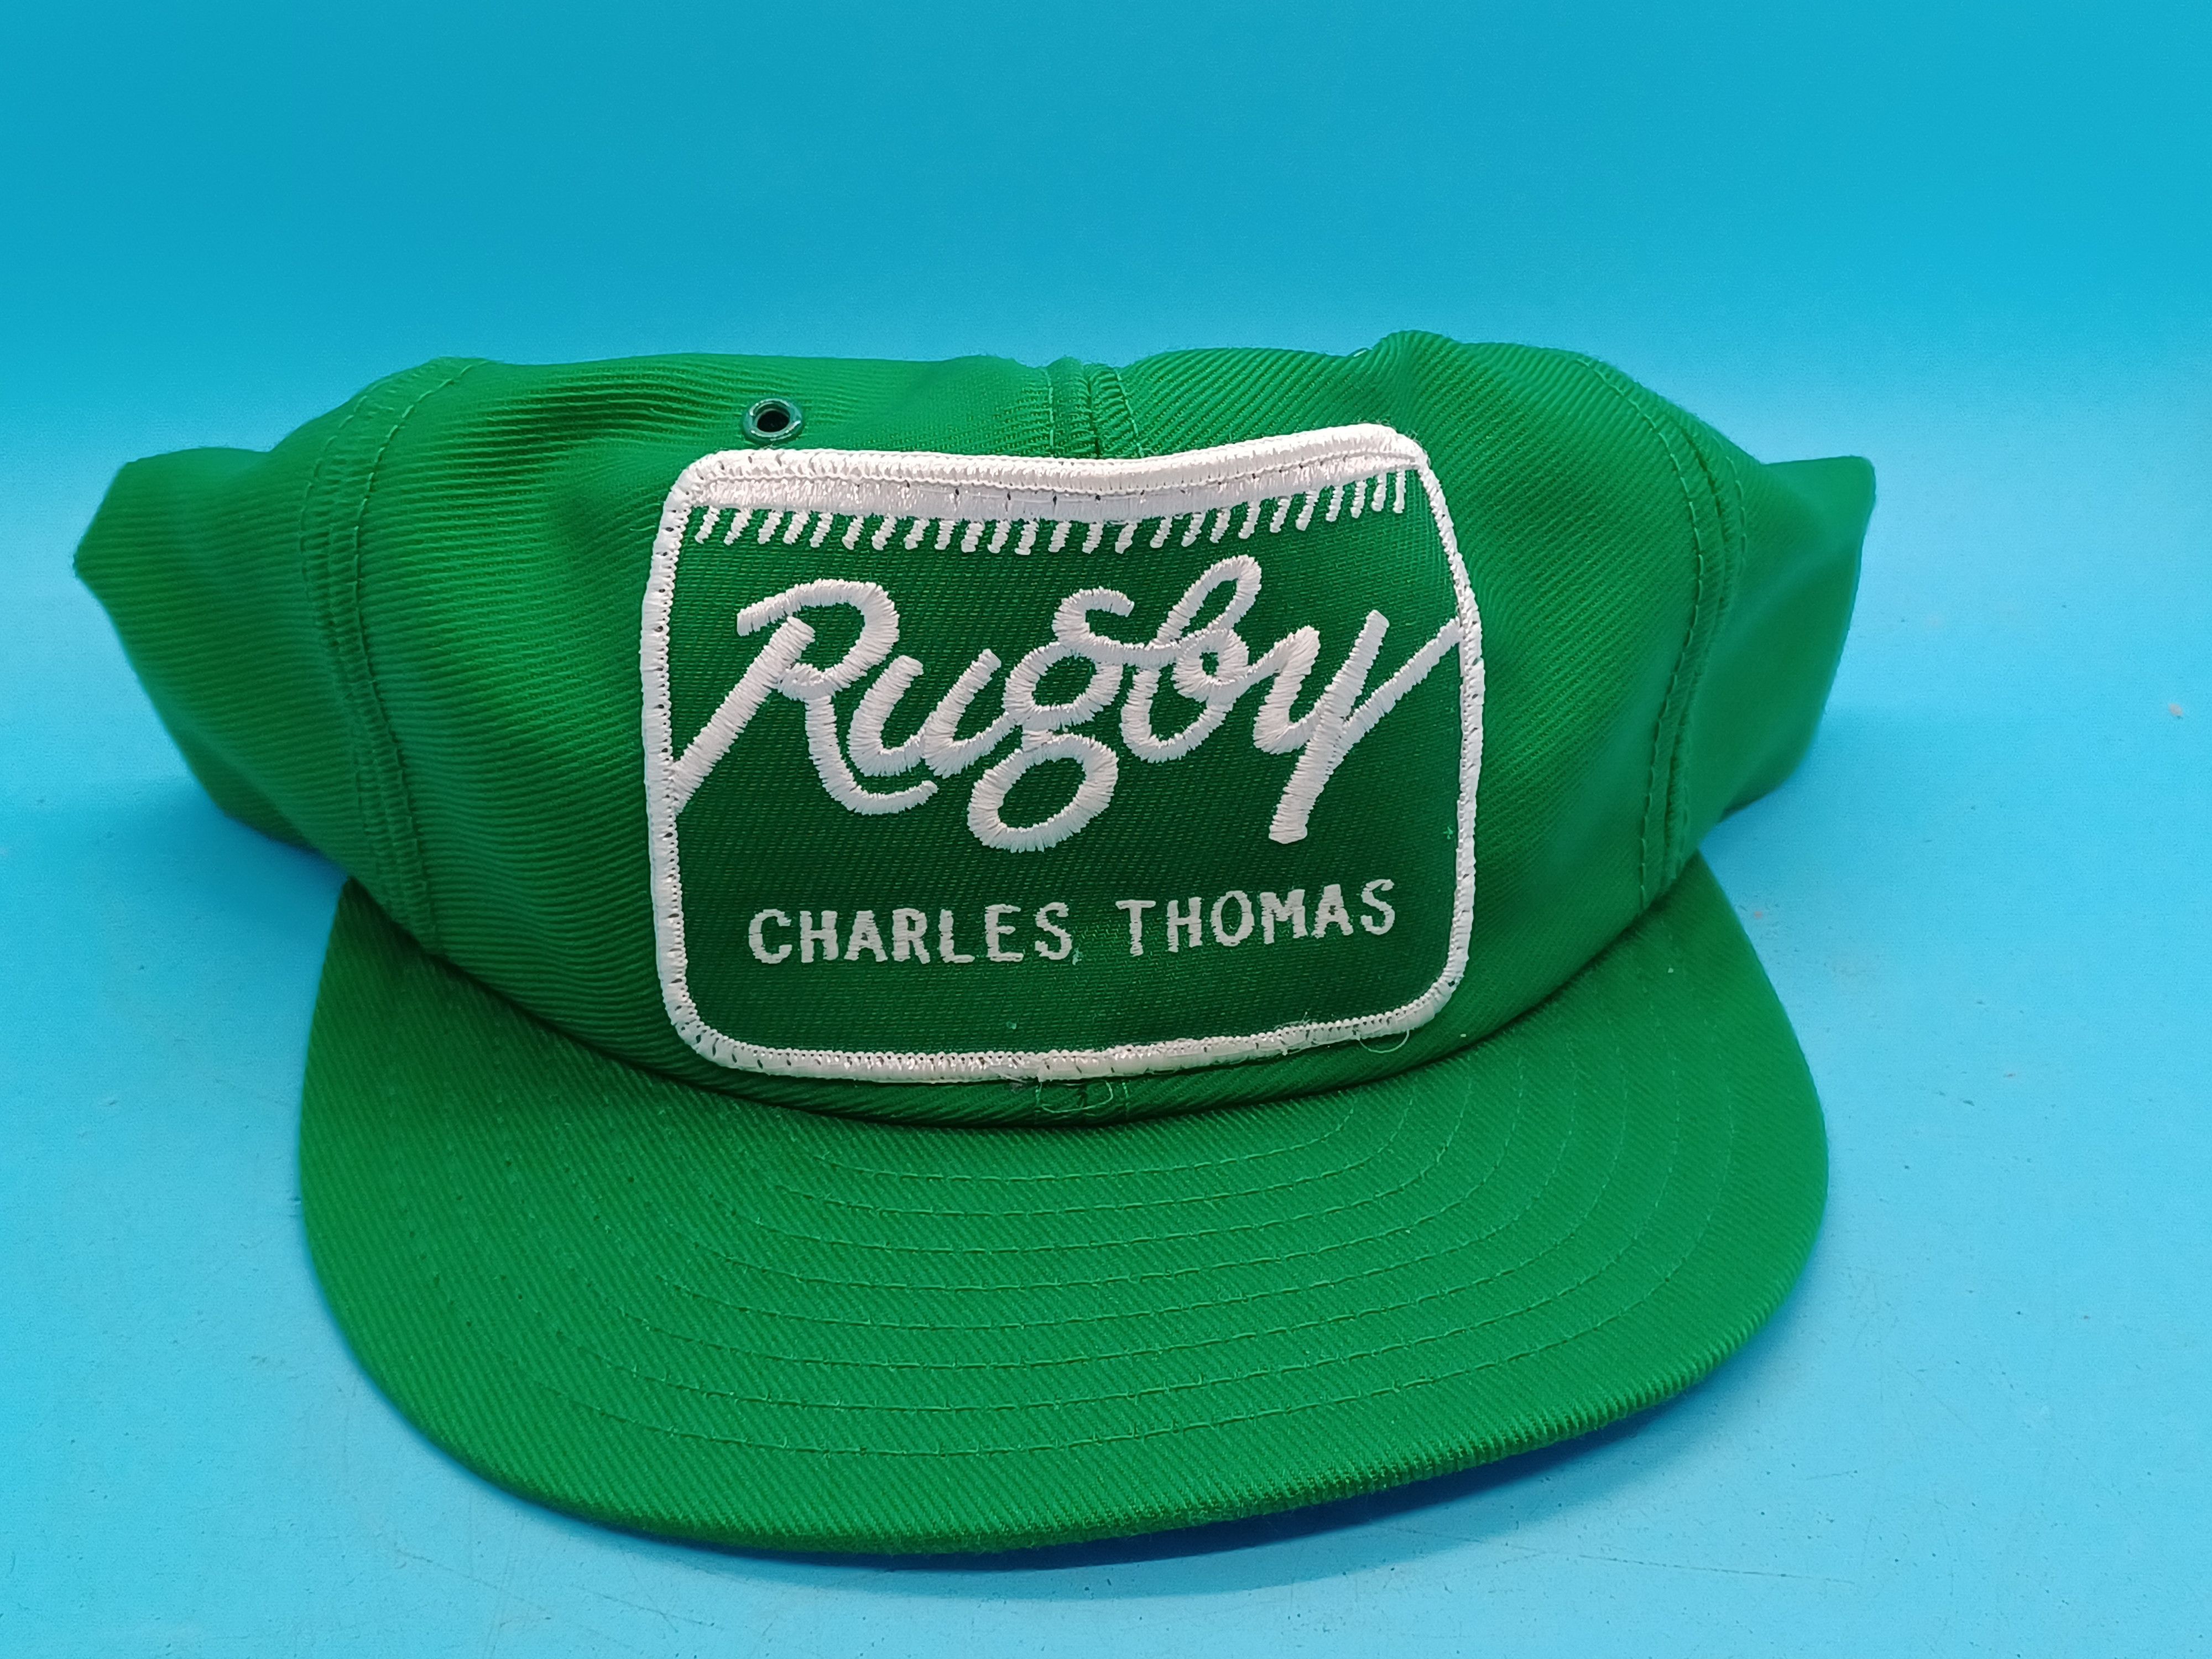 Brand Vintage 80s Rugby Patch snapback hat, green | Grailed